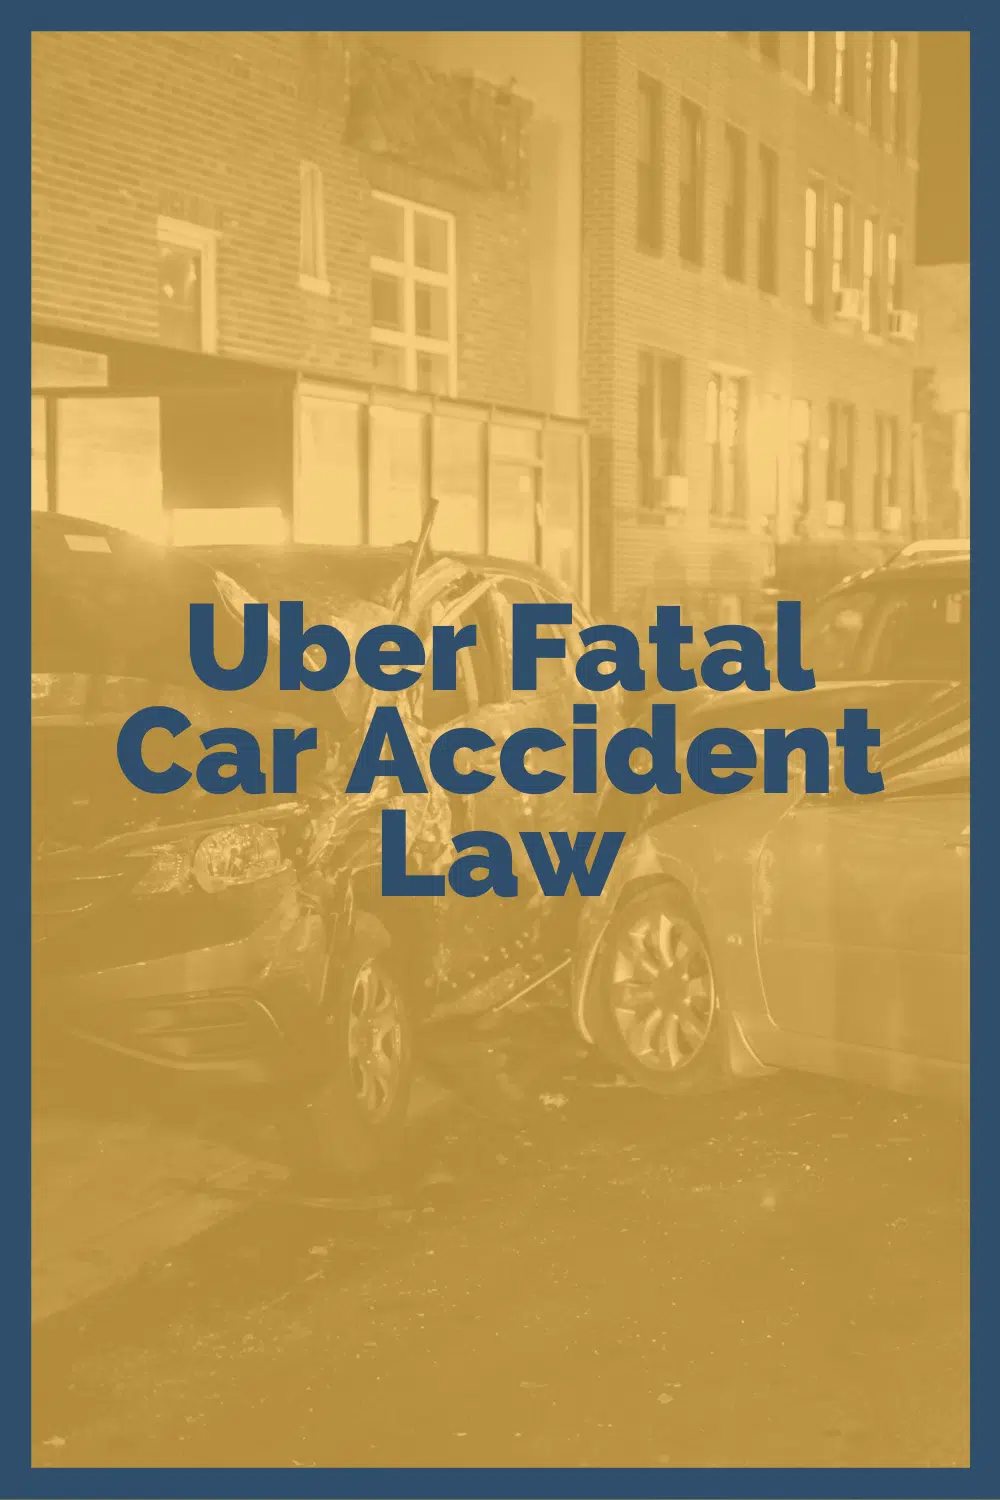 Uber Fatal Accident Law